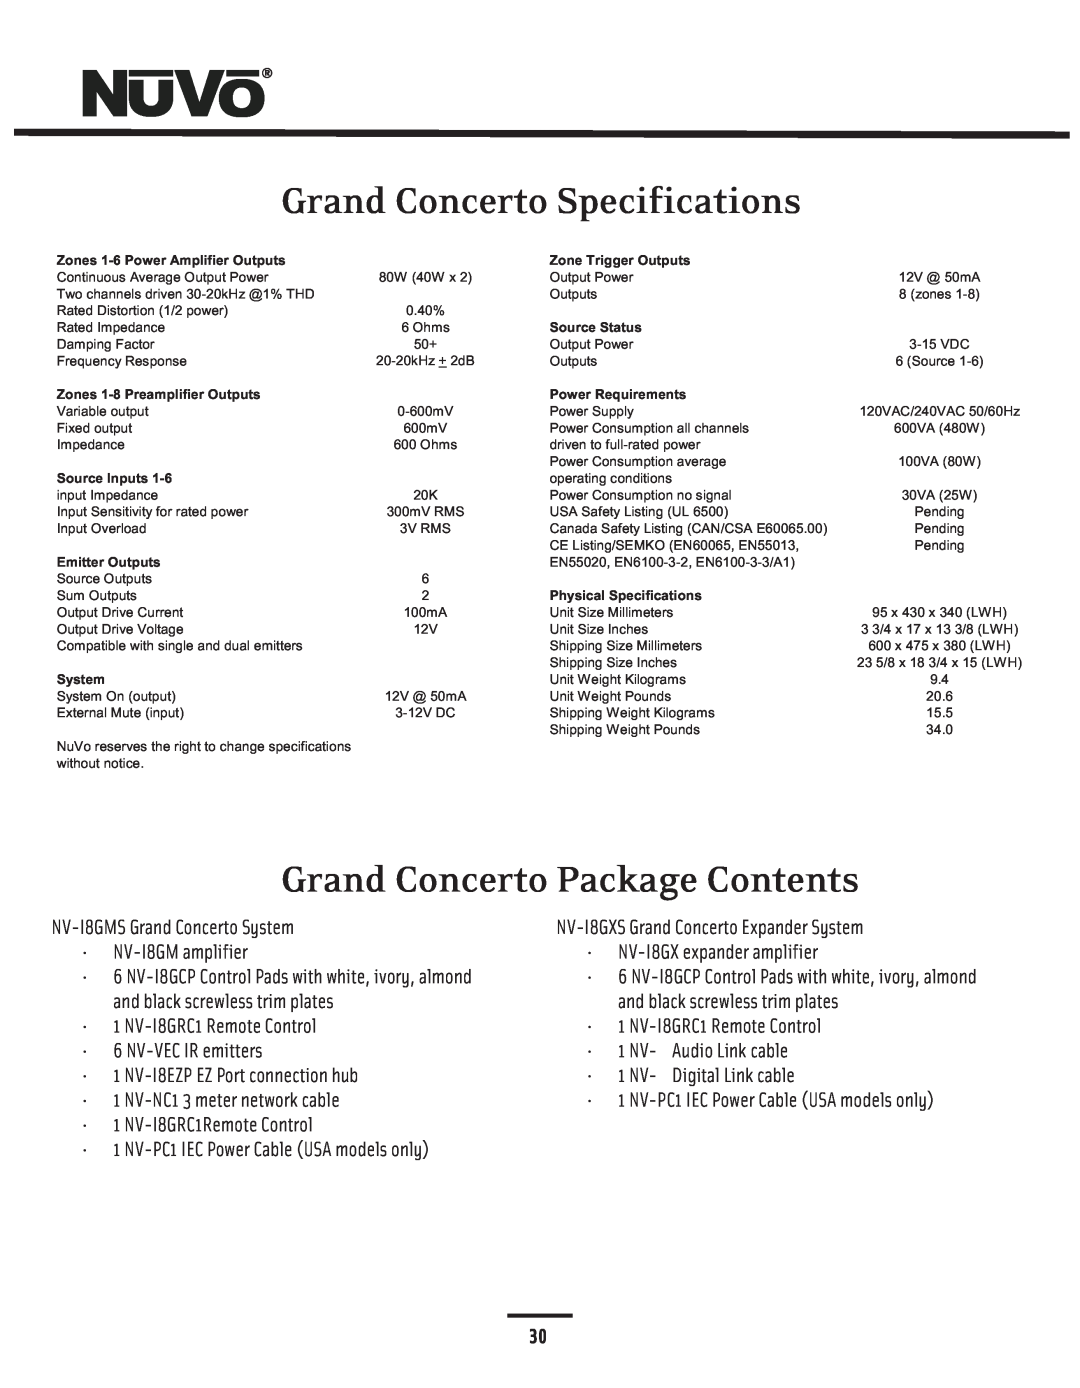 Nuvo NV-I8GMS, NV-I8GXS manual Grand Concerto Specifications, Grand Concerto Package Contents 